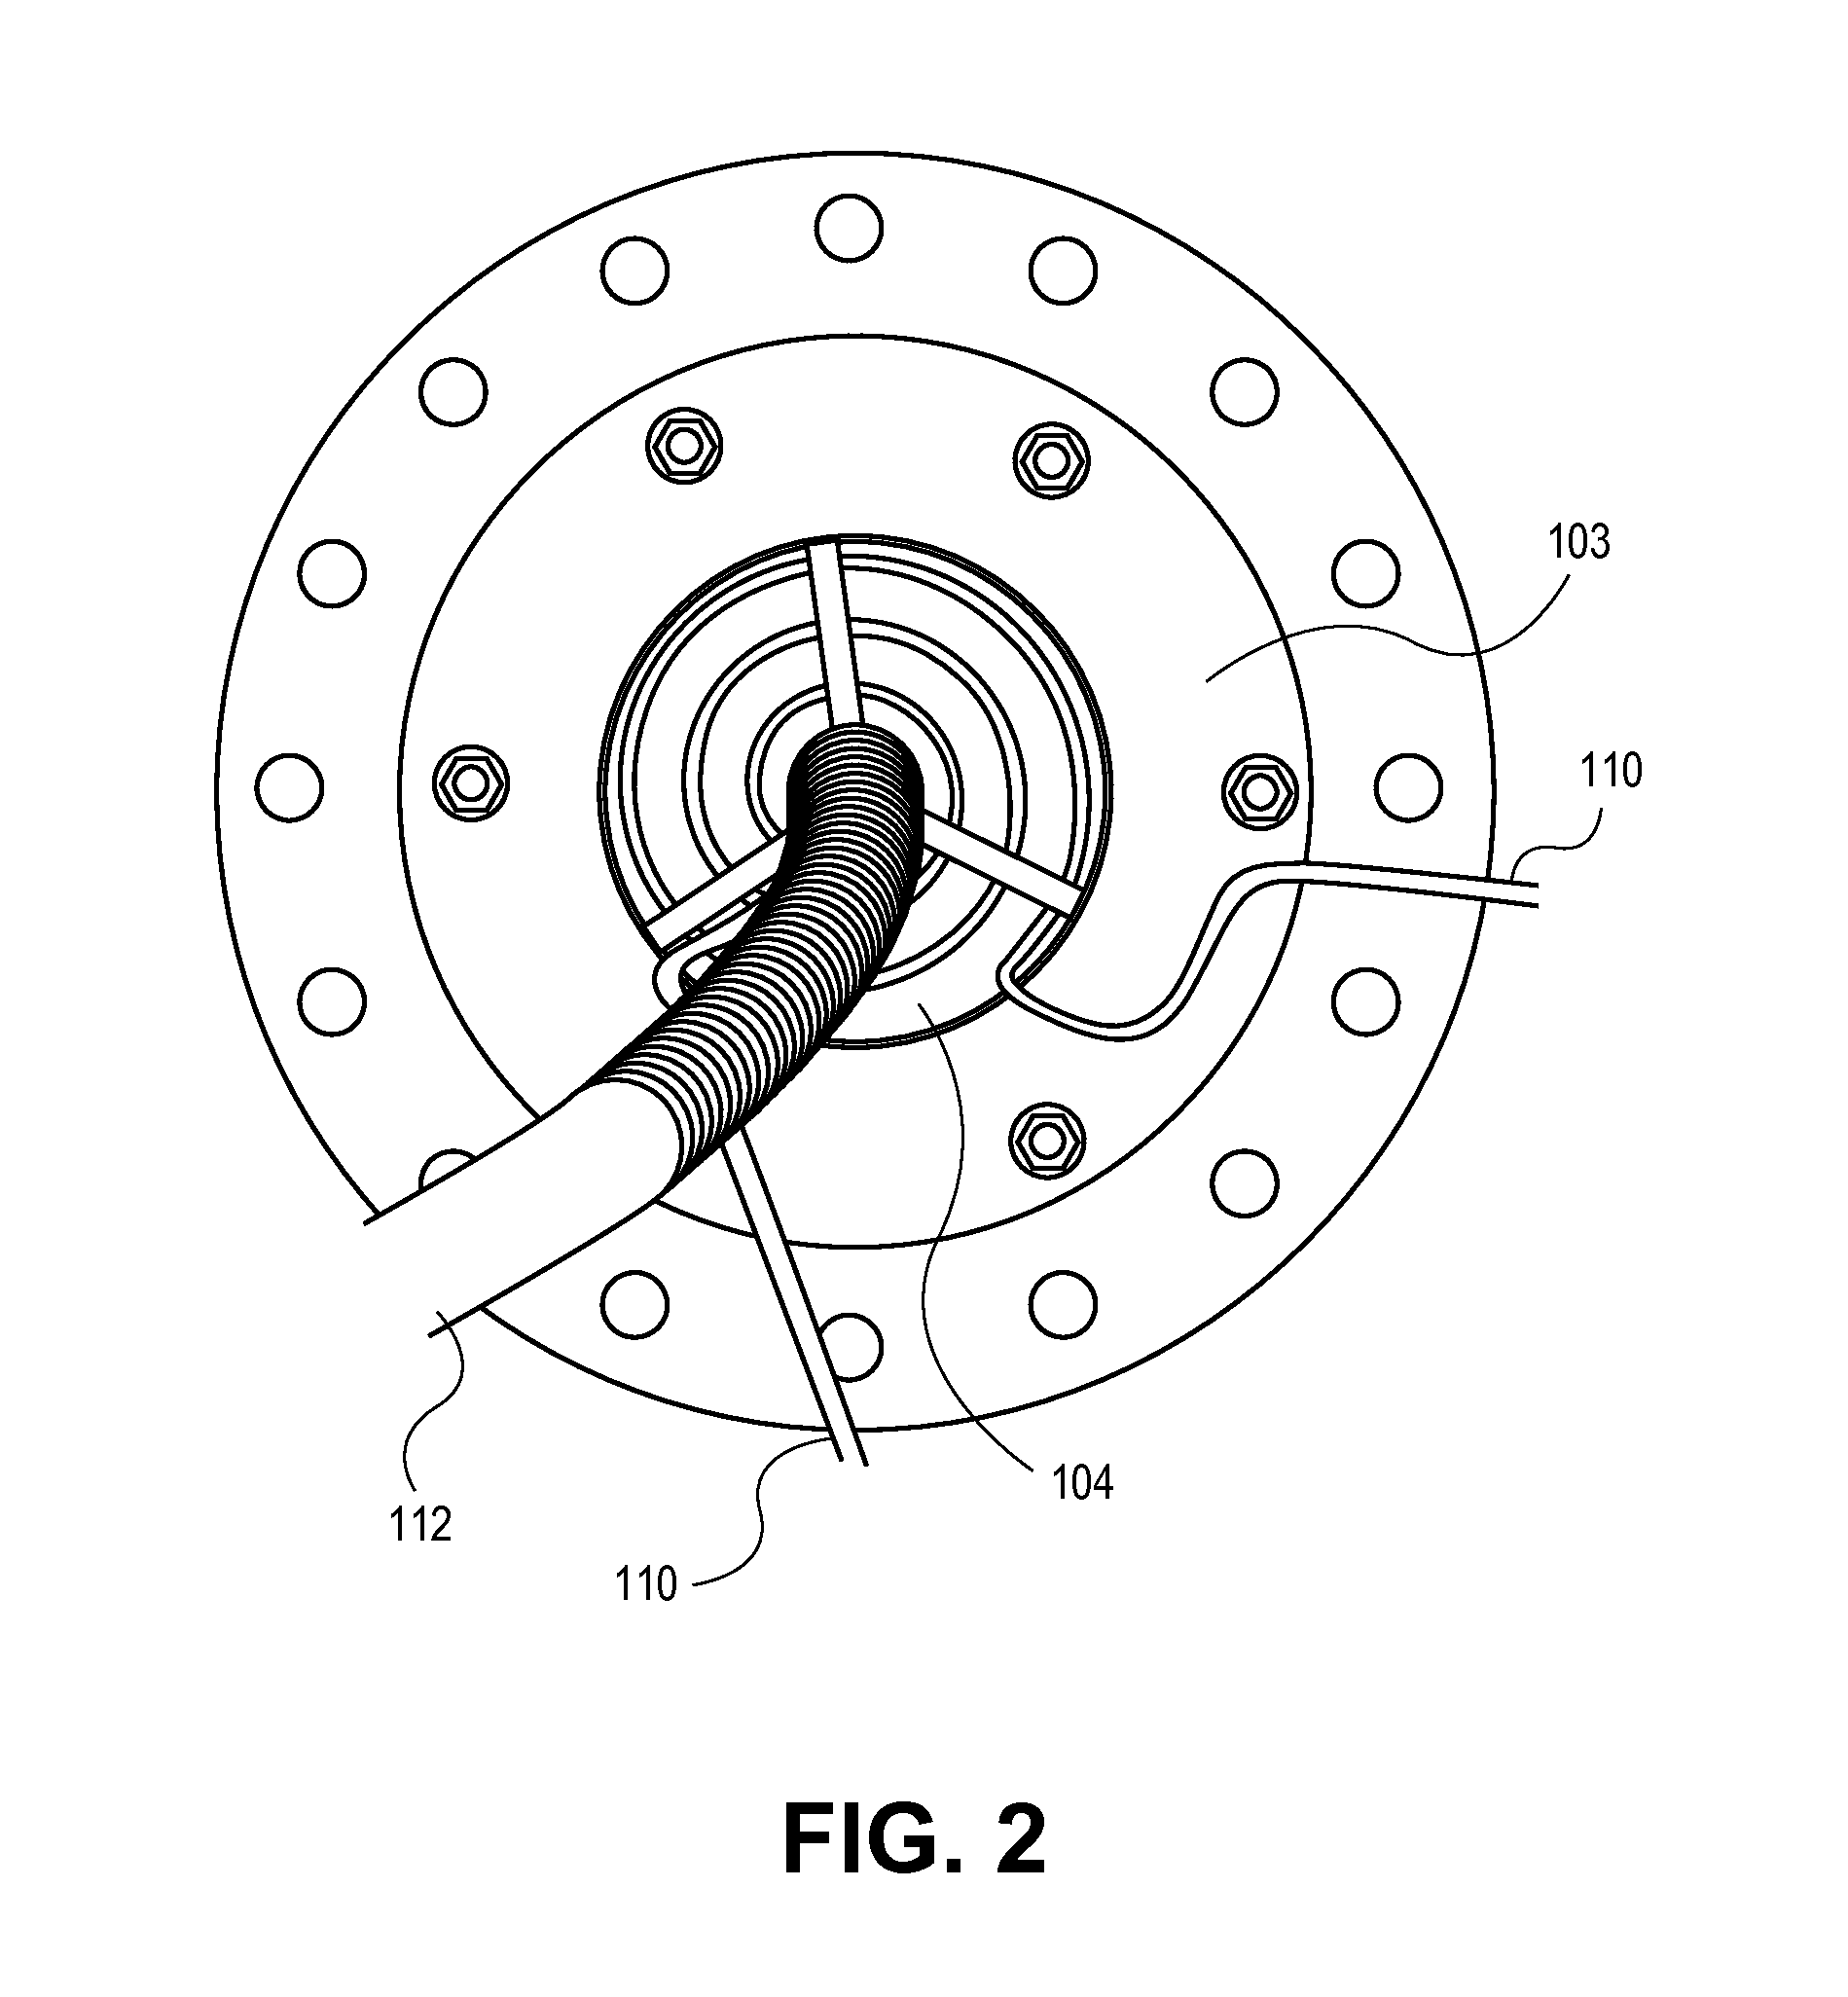 Spiral rf-induction antenna based ion source for neutron generators